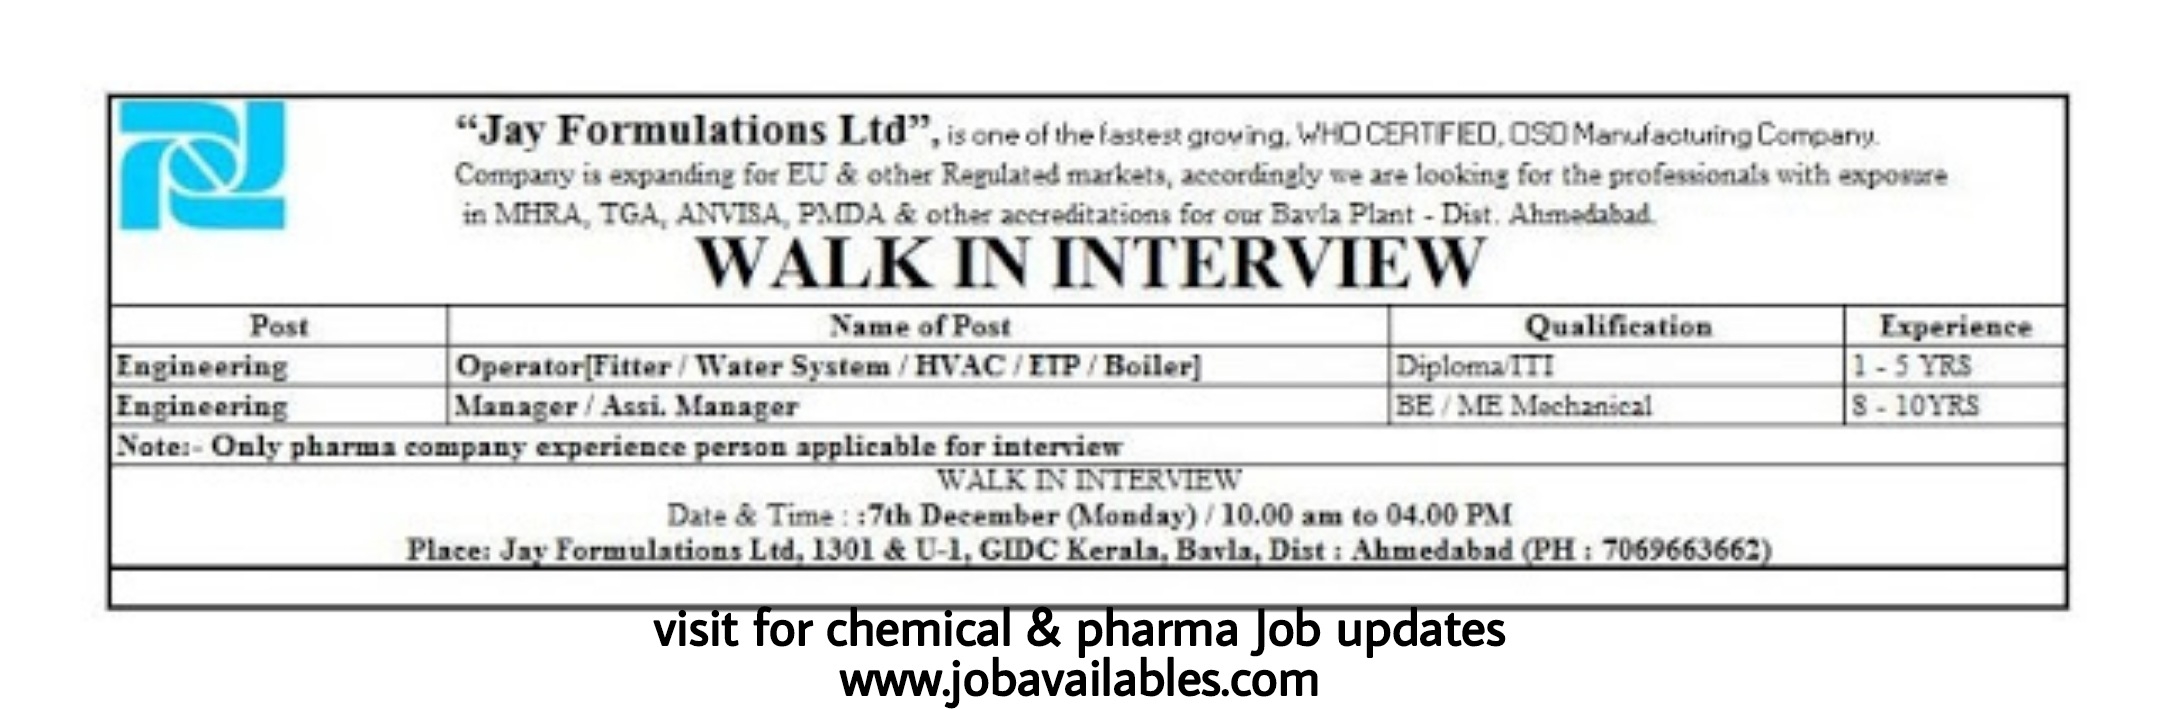 Job Availables, Jay Formulation Ltd Interview For Engineering Department